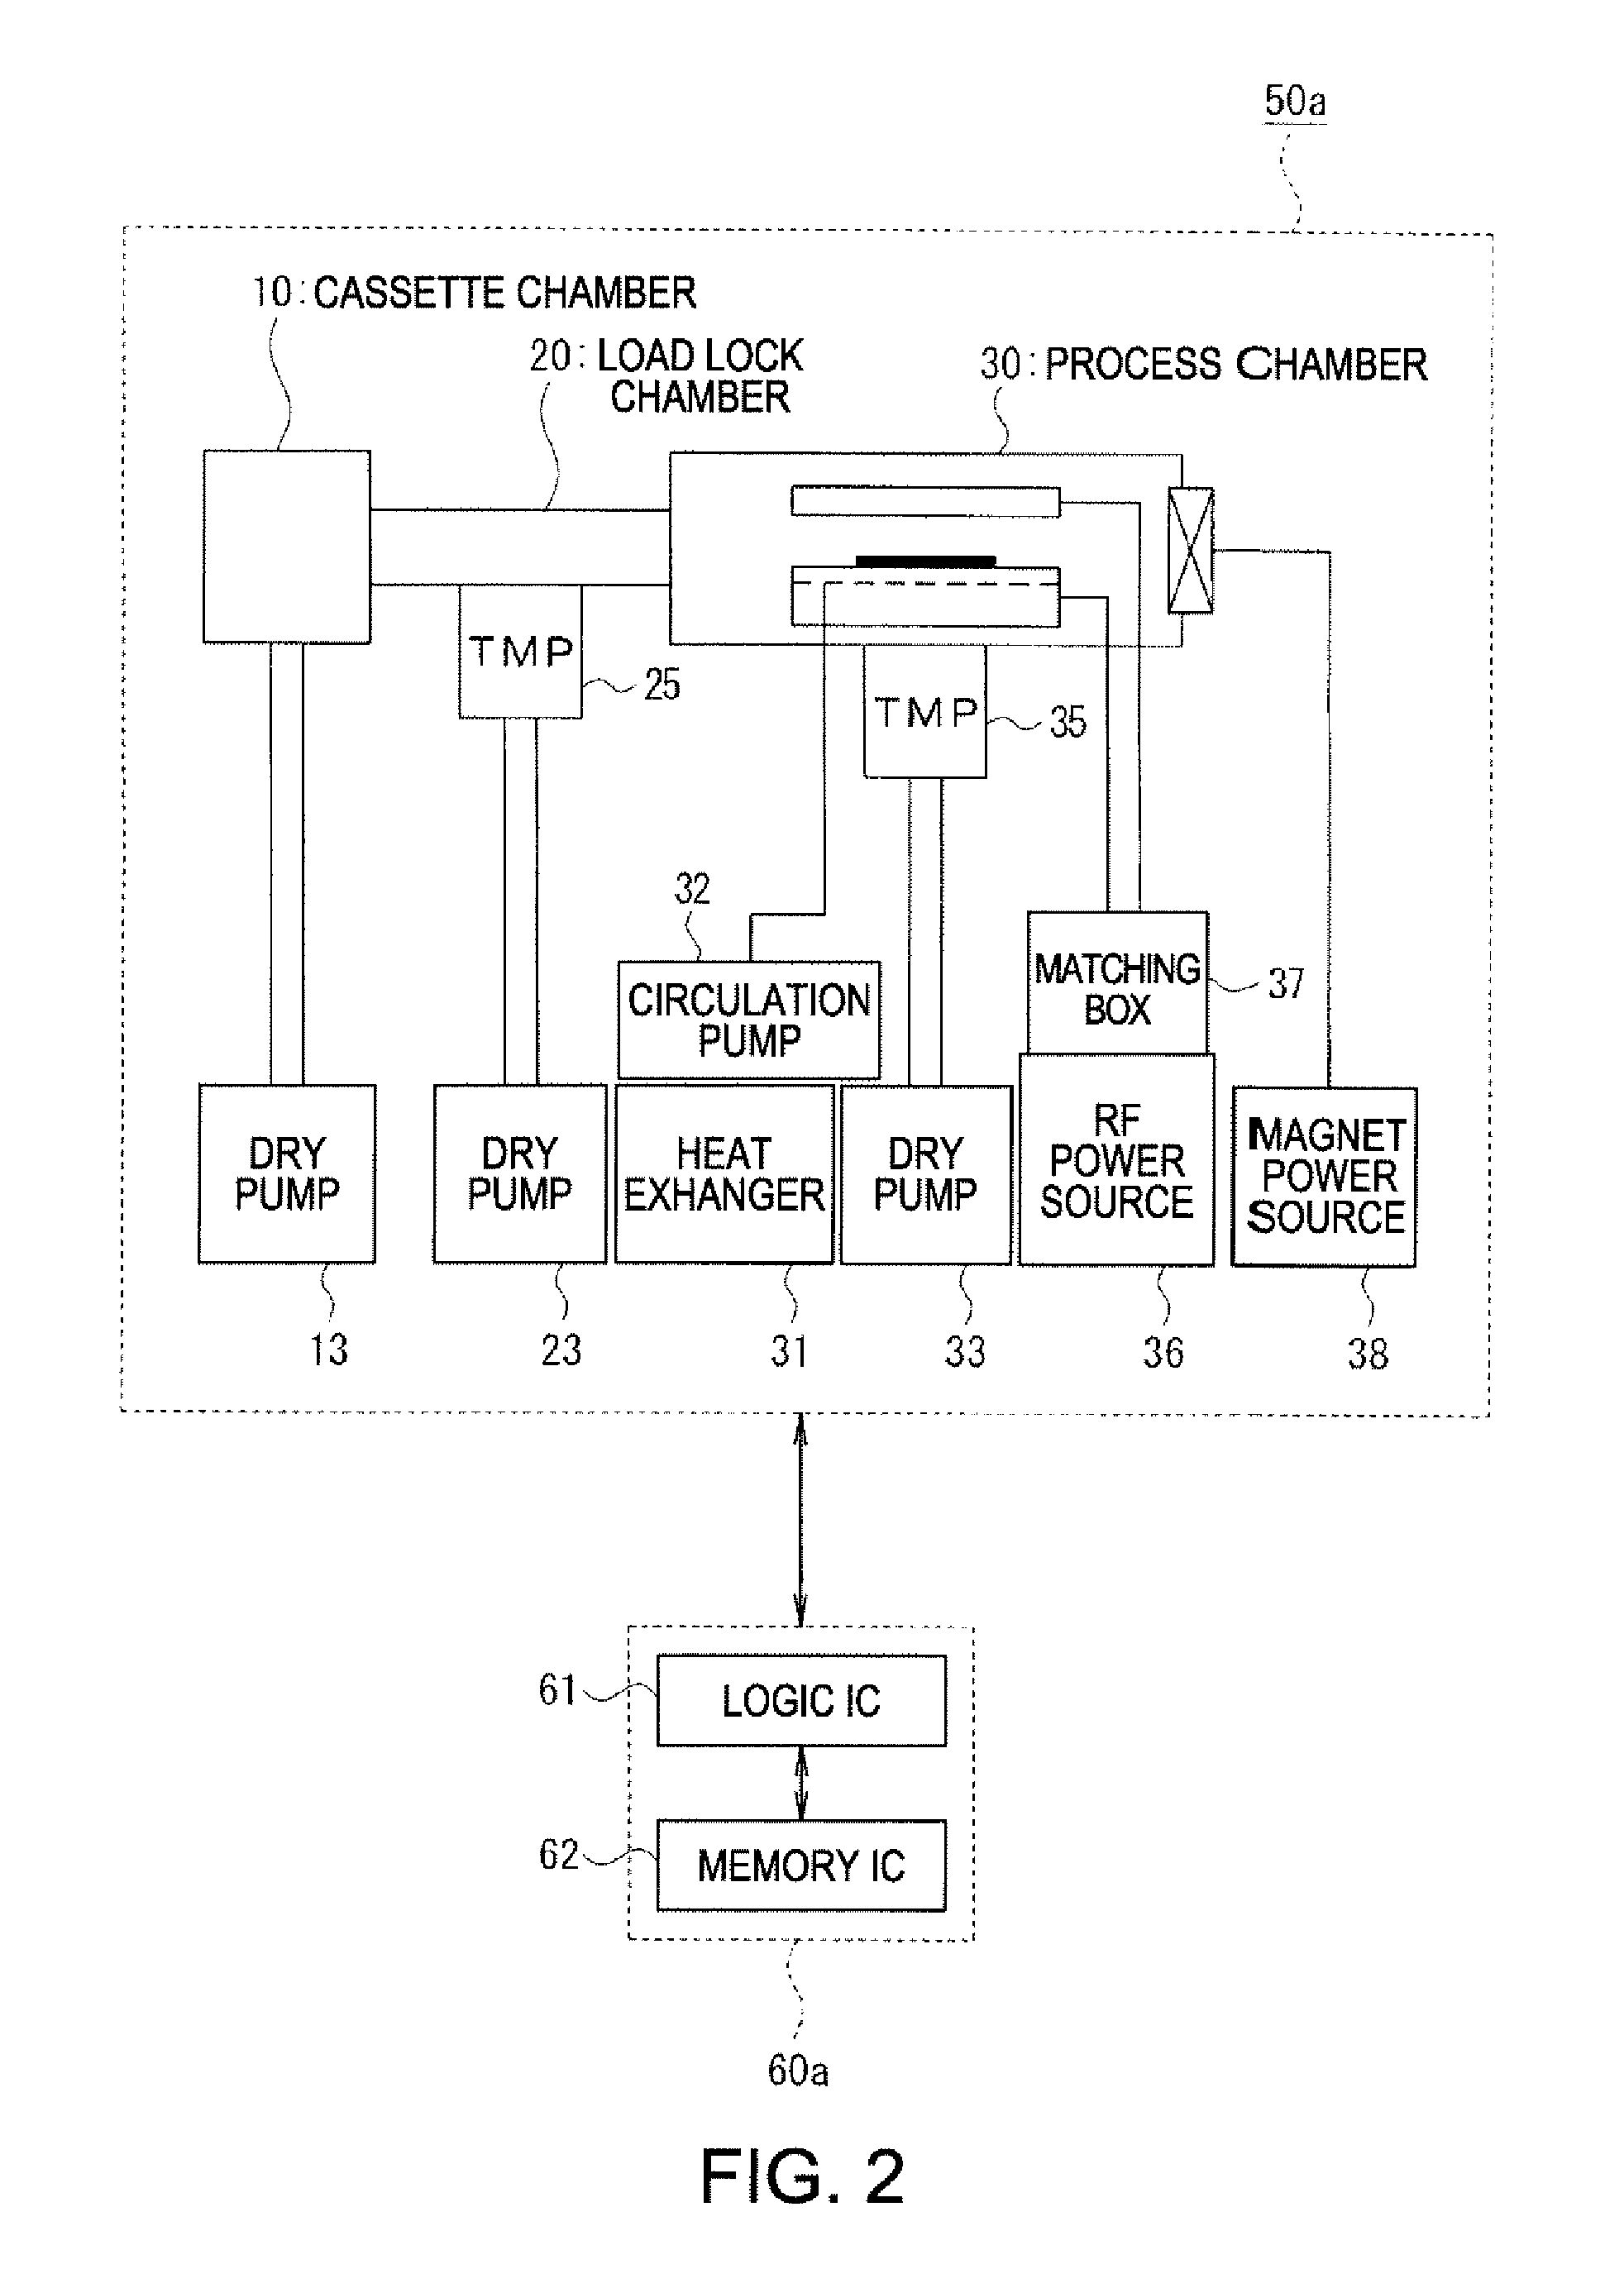 Method and system for controlling semiconductor manufacturing apparatus